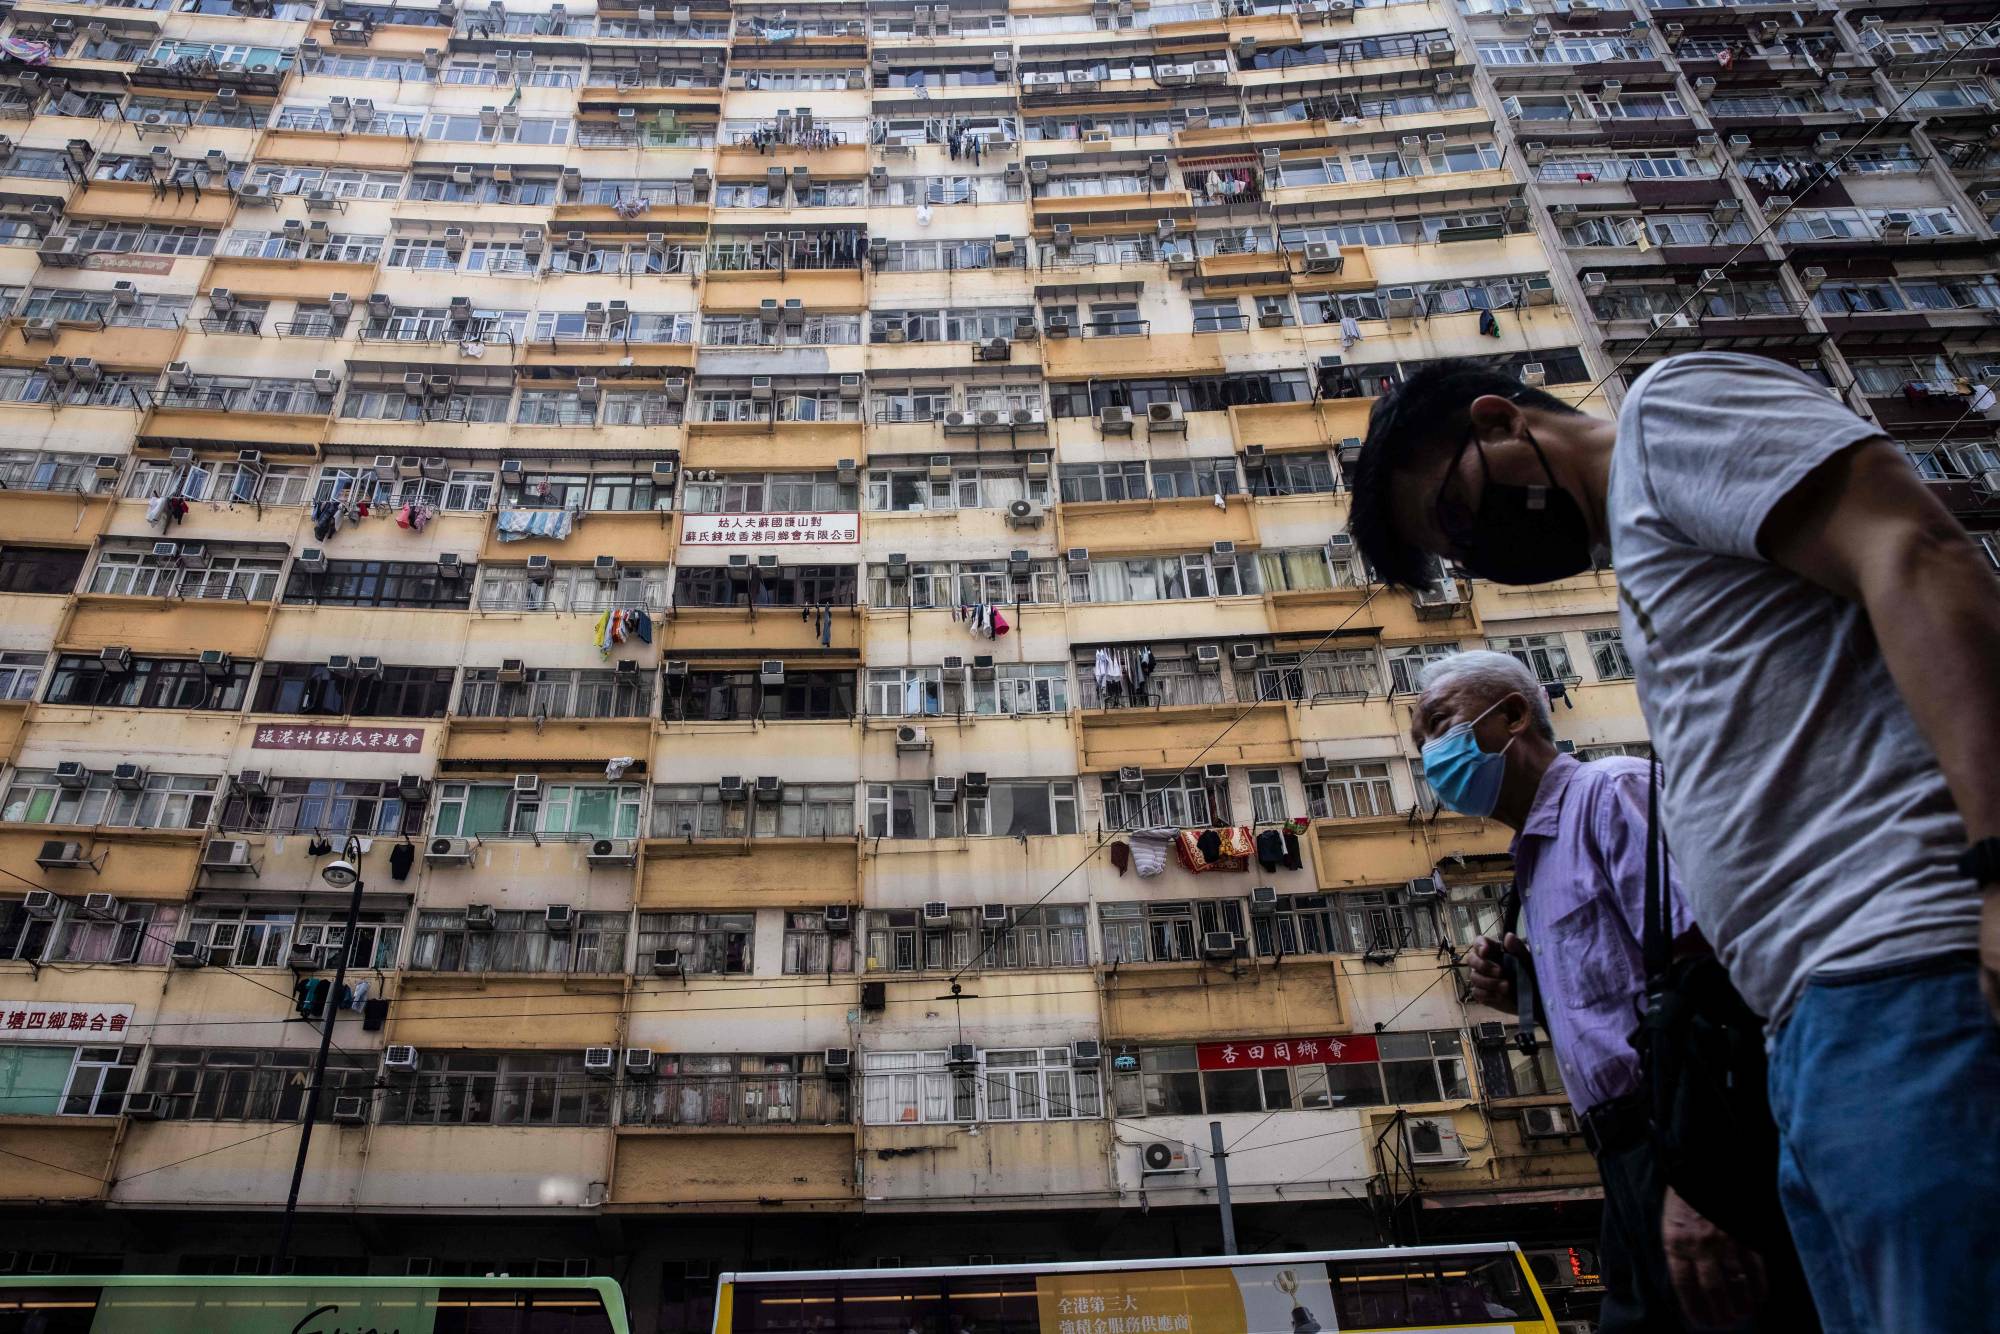 New Hong Kong leader’s vow to fix housing crisis draws skeptics - The ...